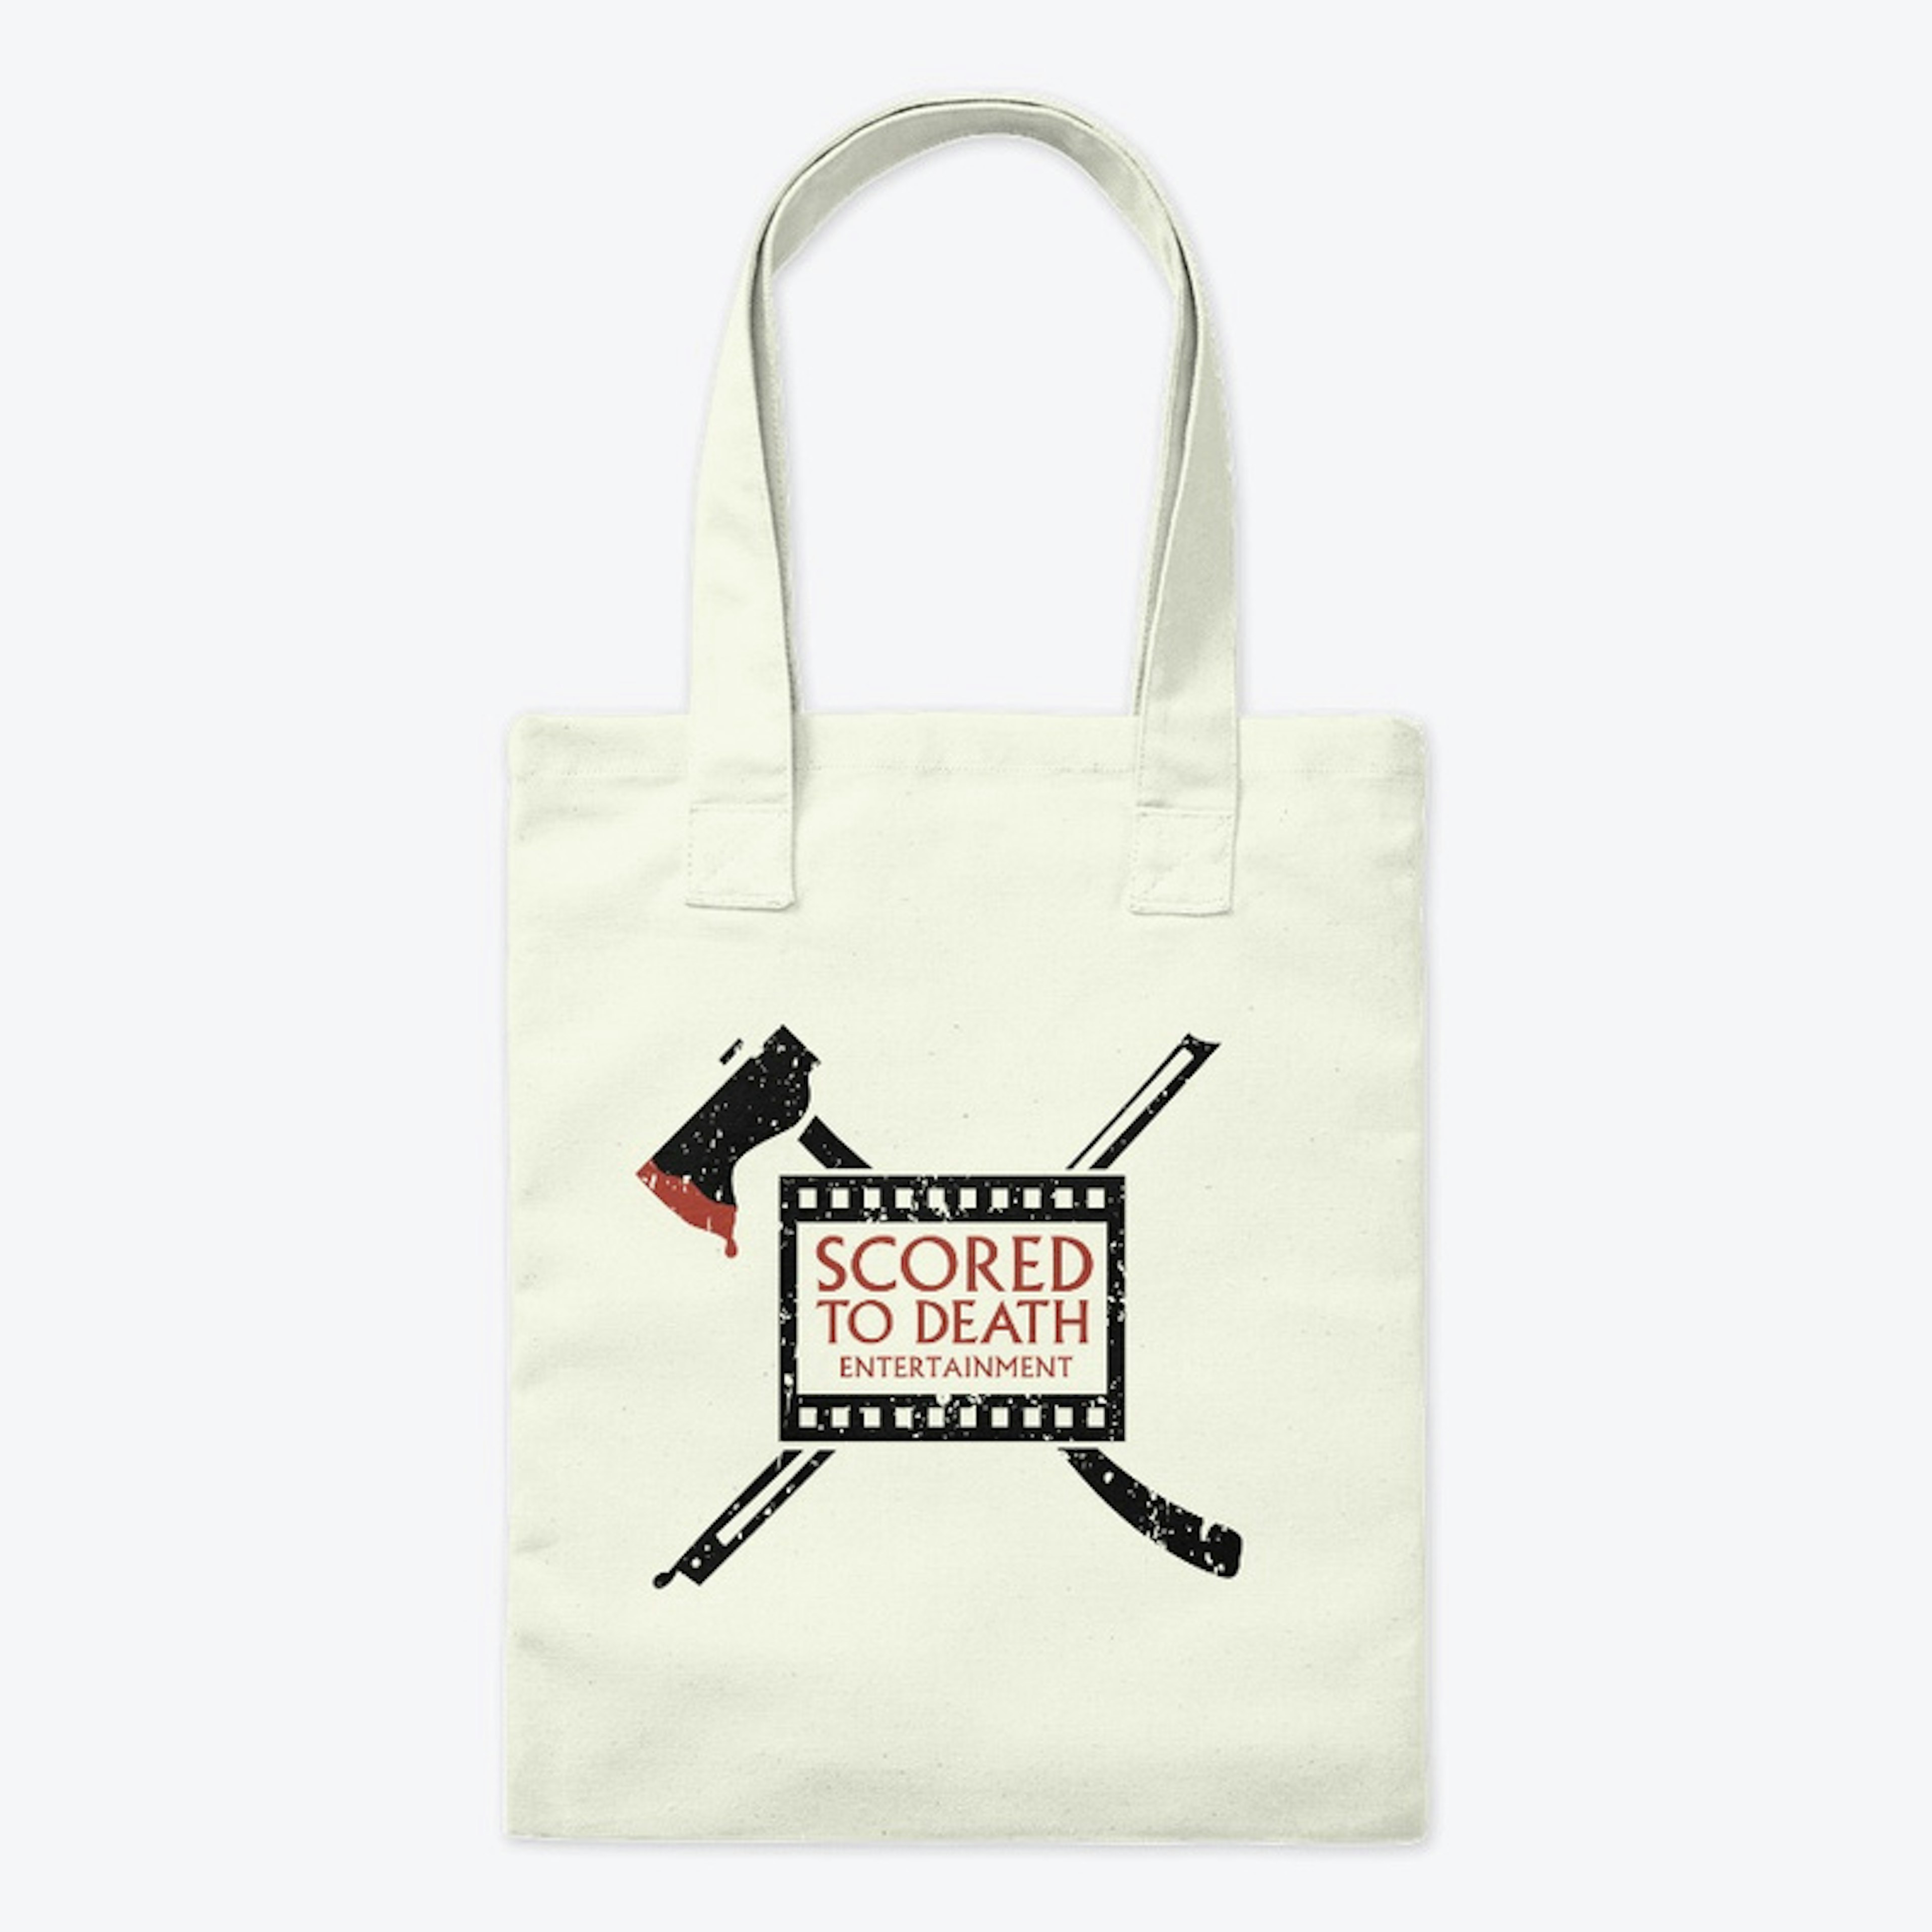 Scored to Death Ent. Tote Bag